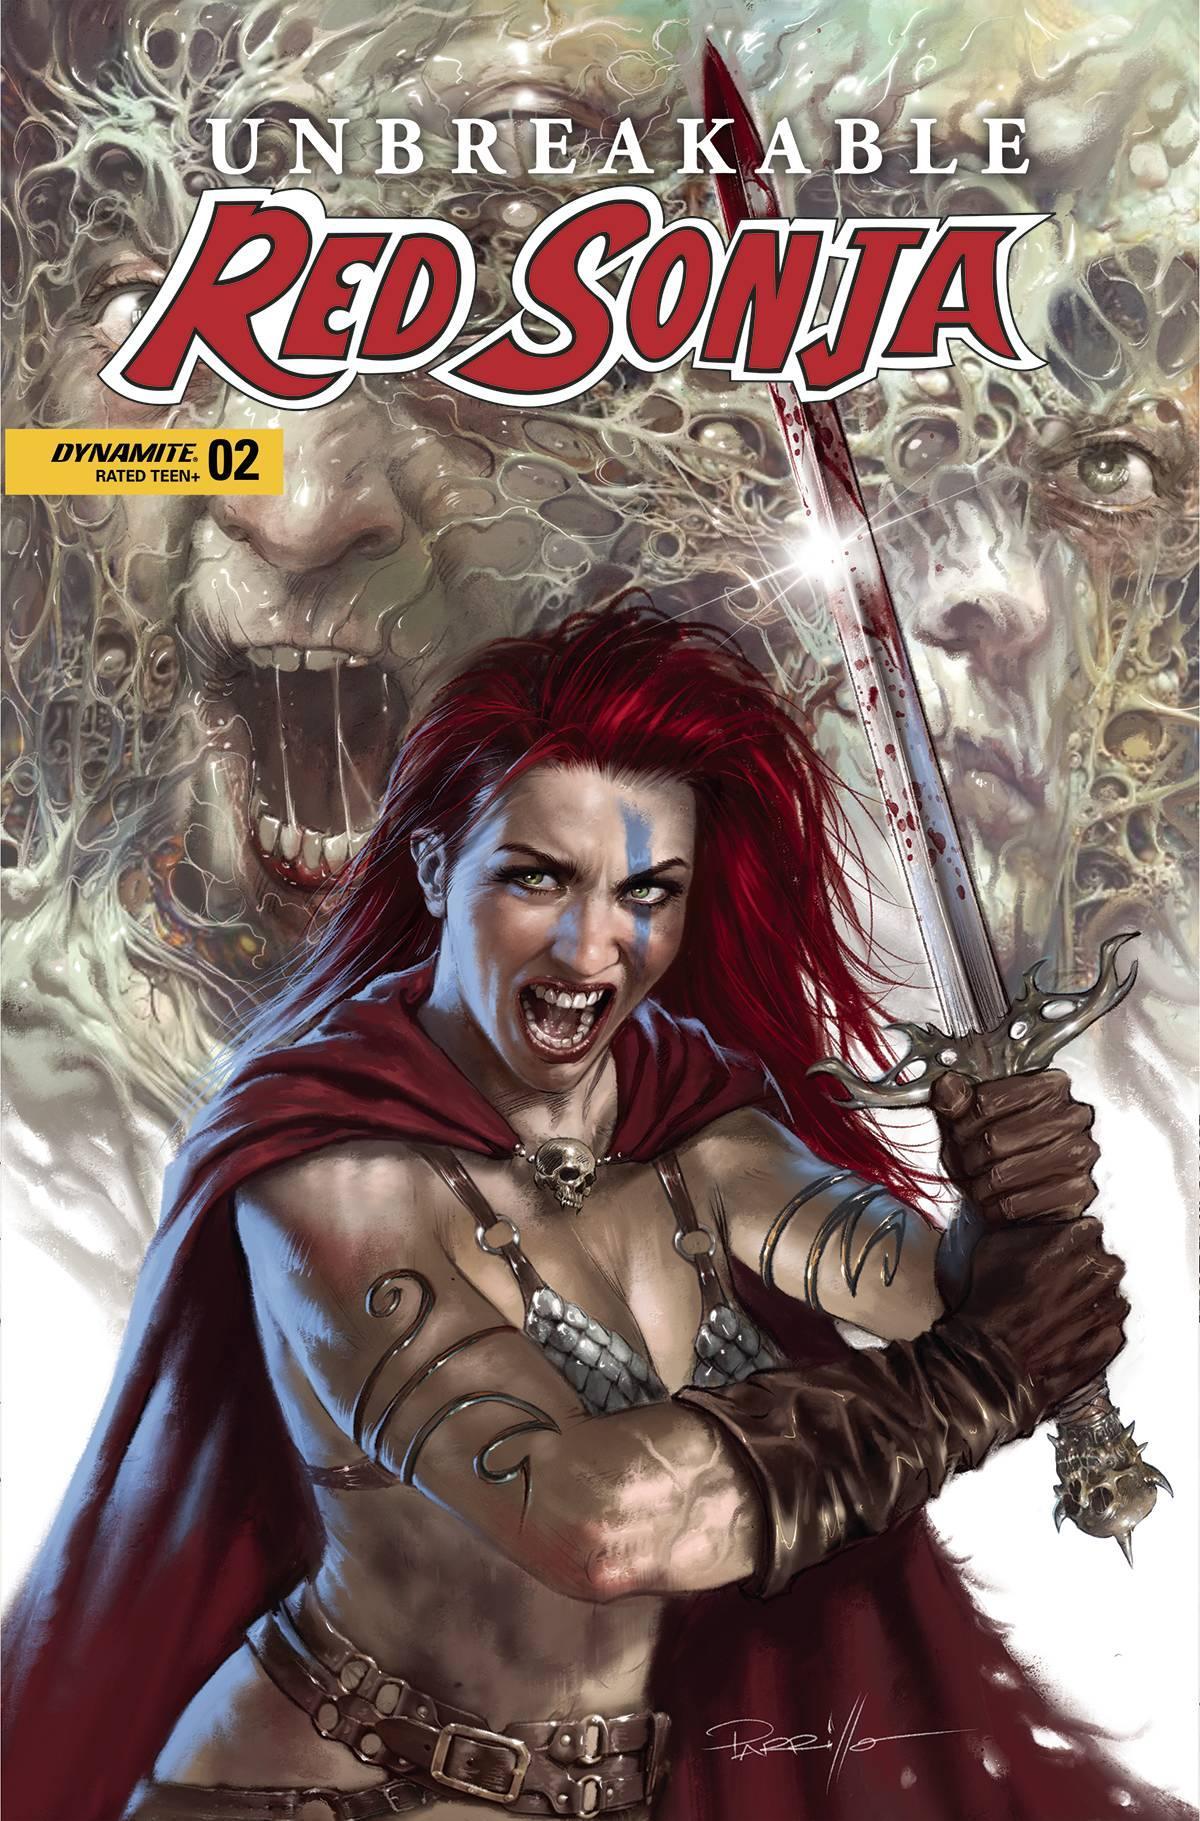 UNBREAKABLE RED SONJA #2 CVR A PARRILLO